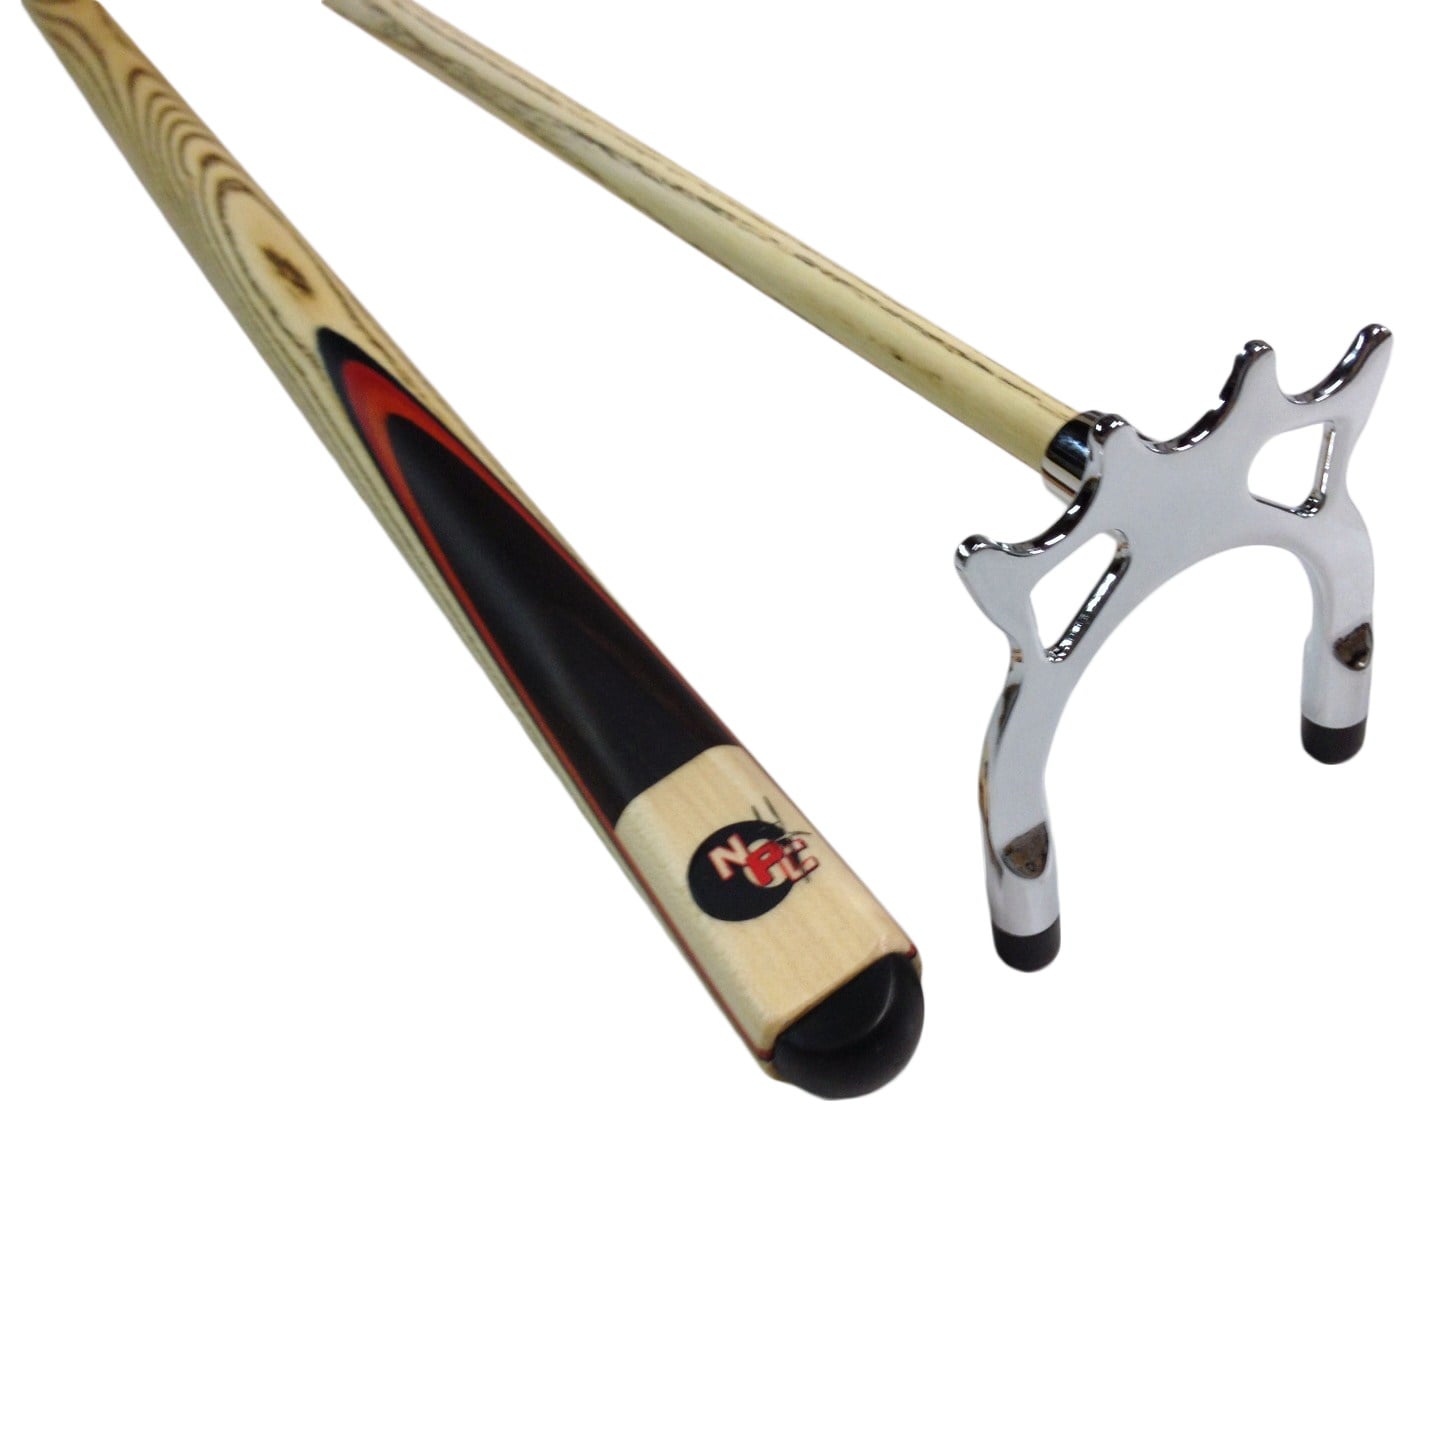 FULL ASH With Red Wood Flame Pool Snooker Billiard Cue SPIDER, 1 x Chrome Spider